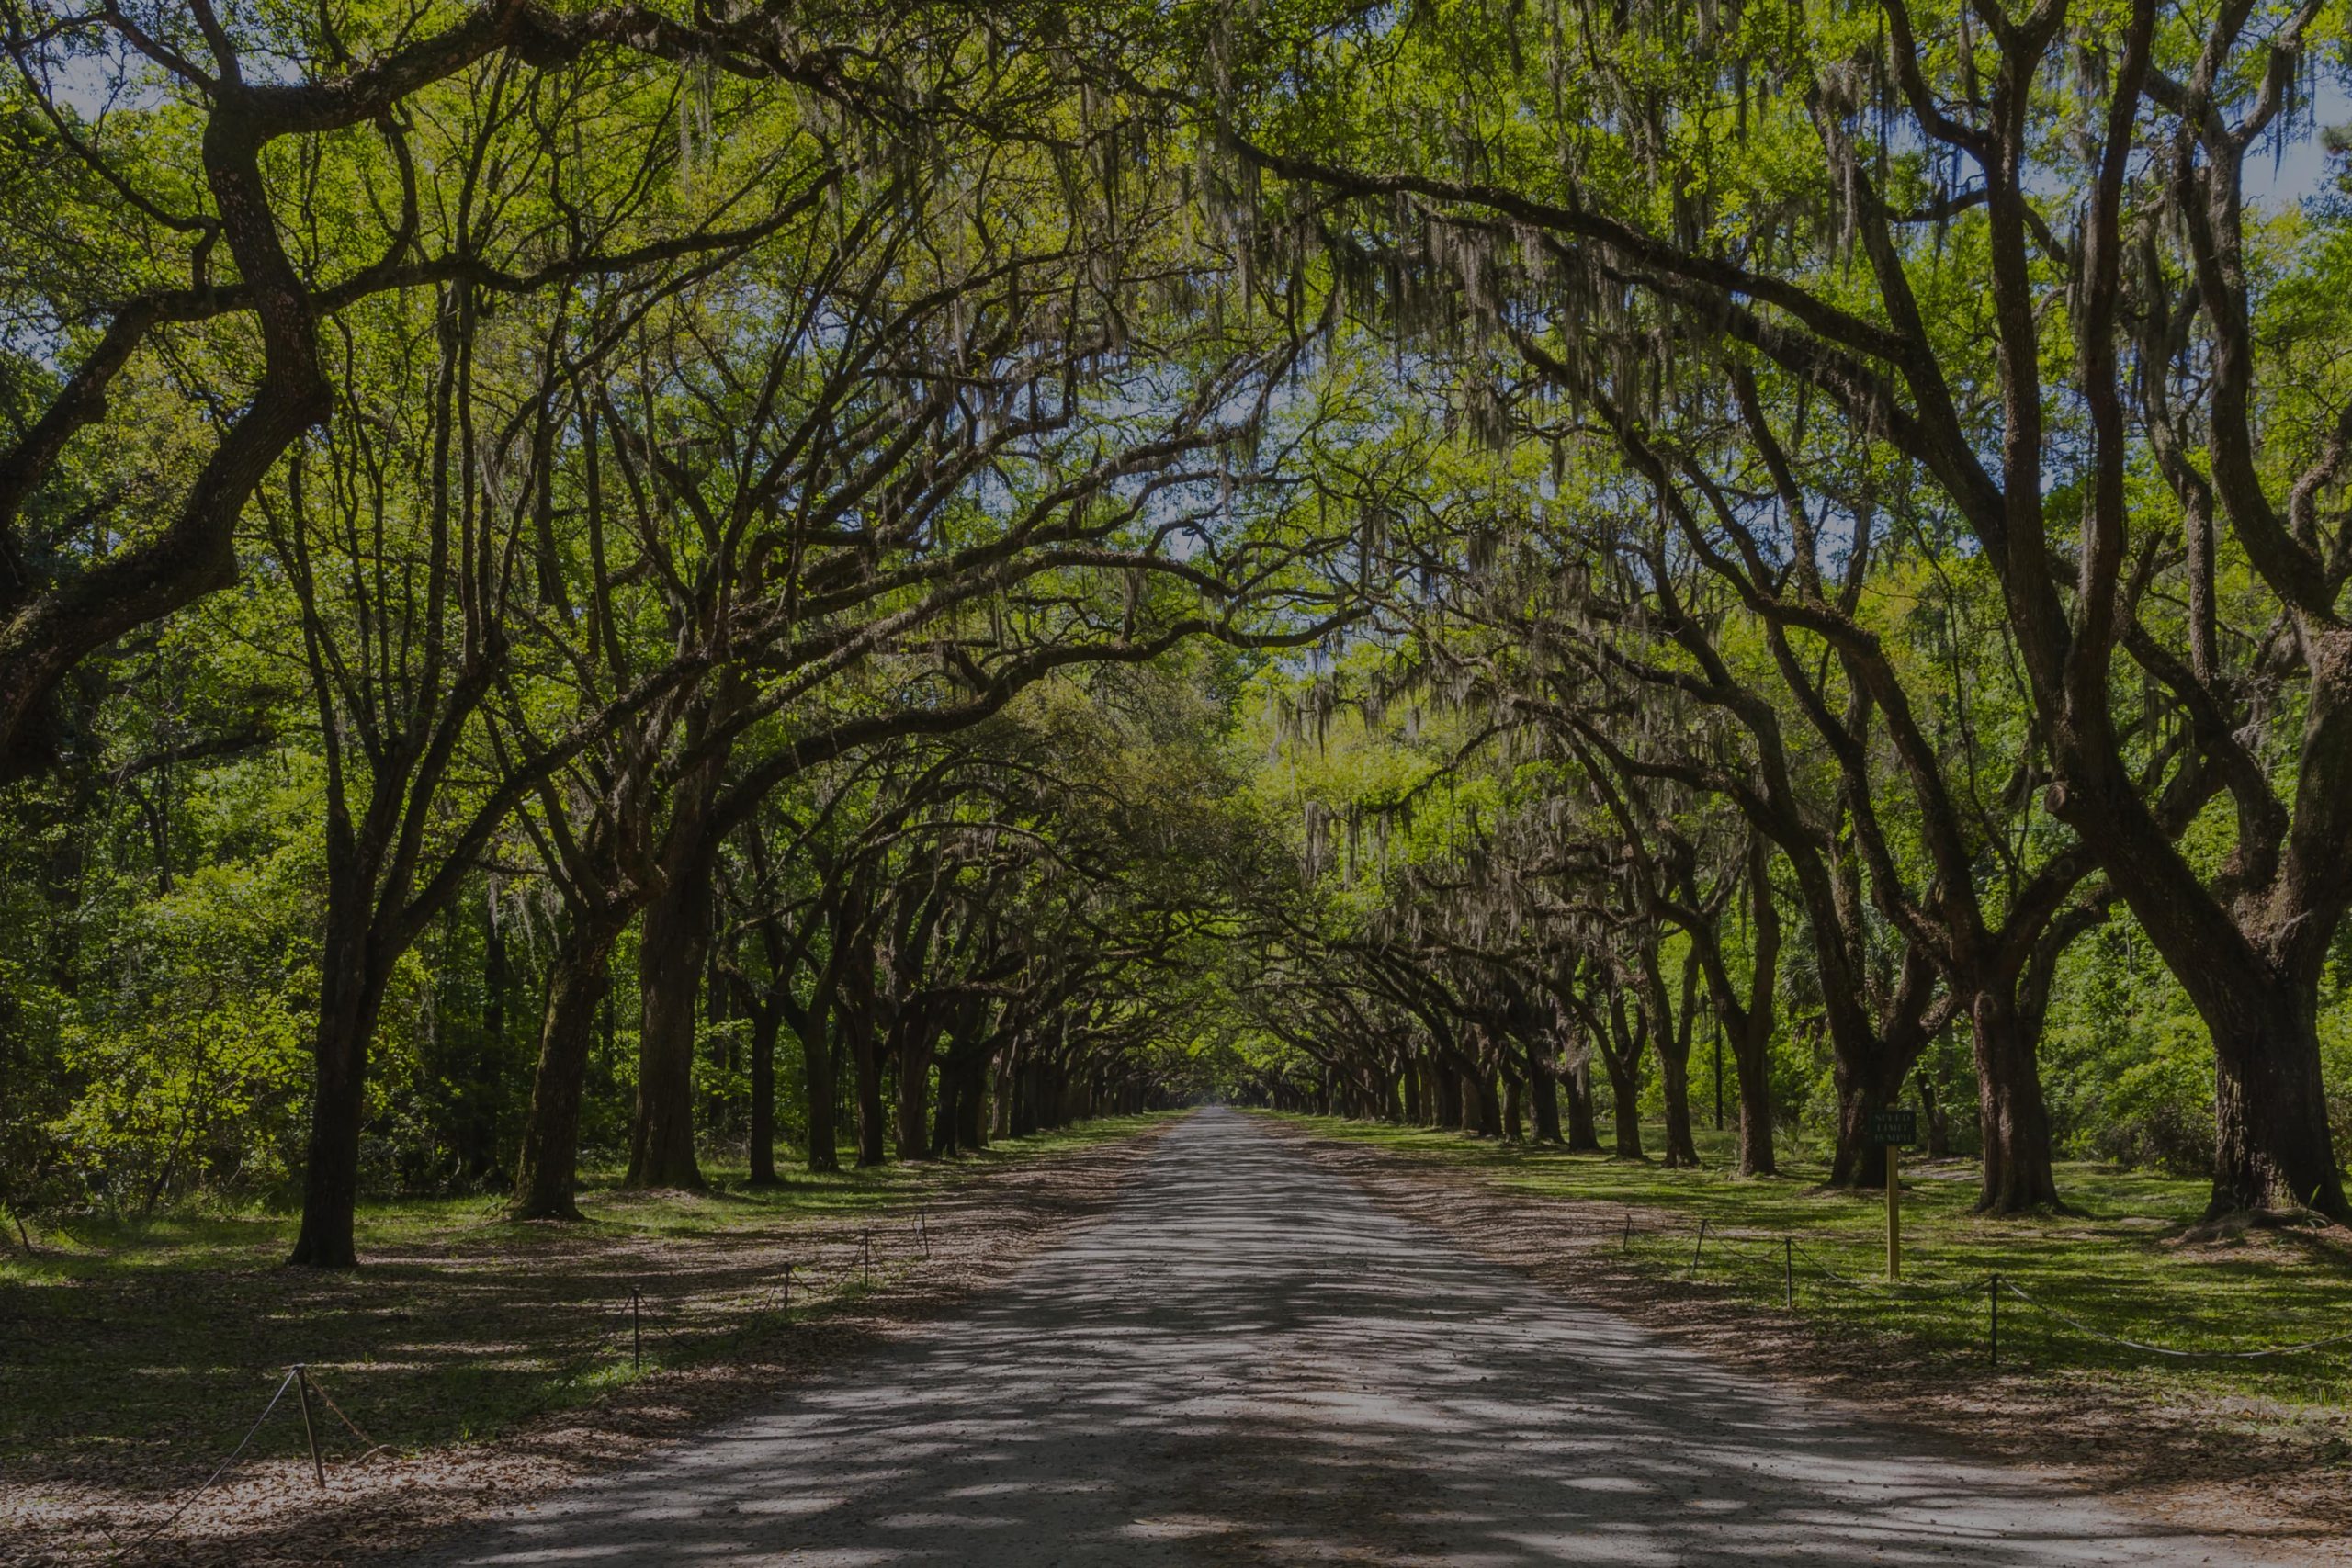 Long road lined with ancient live oak trees draped in spanish moss